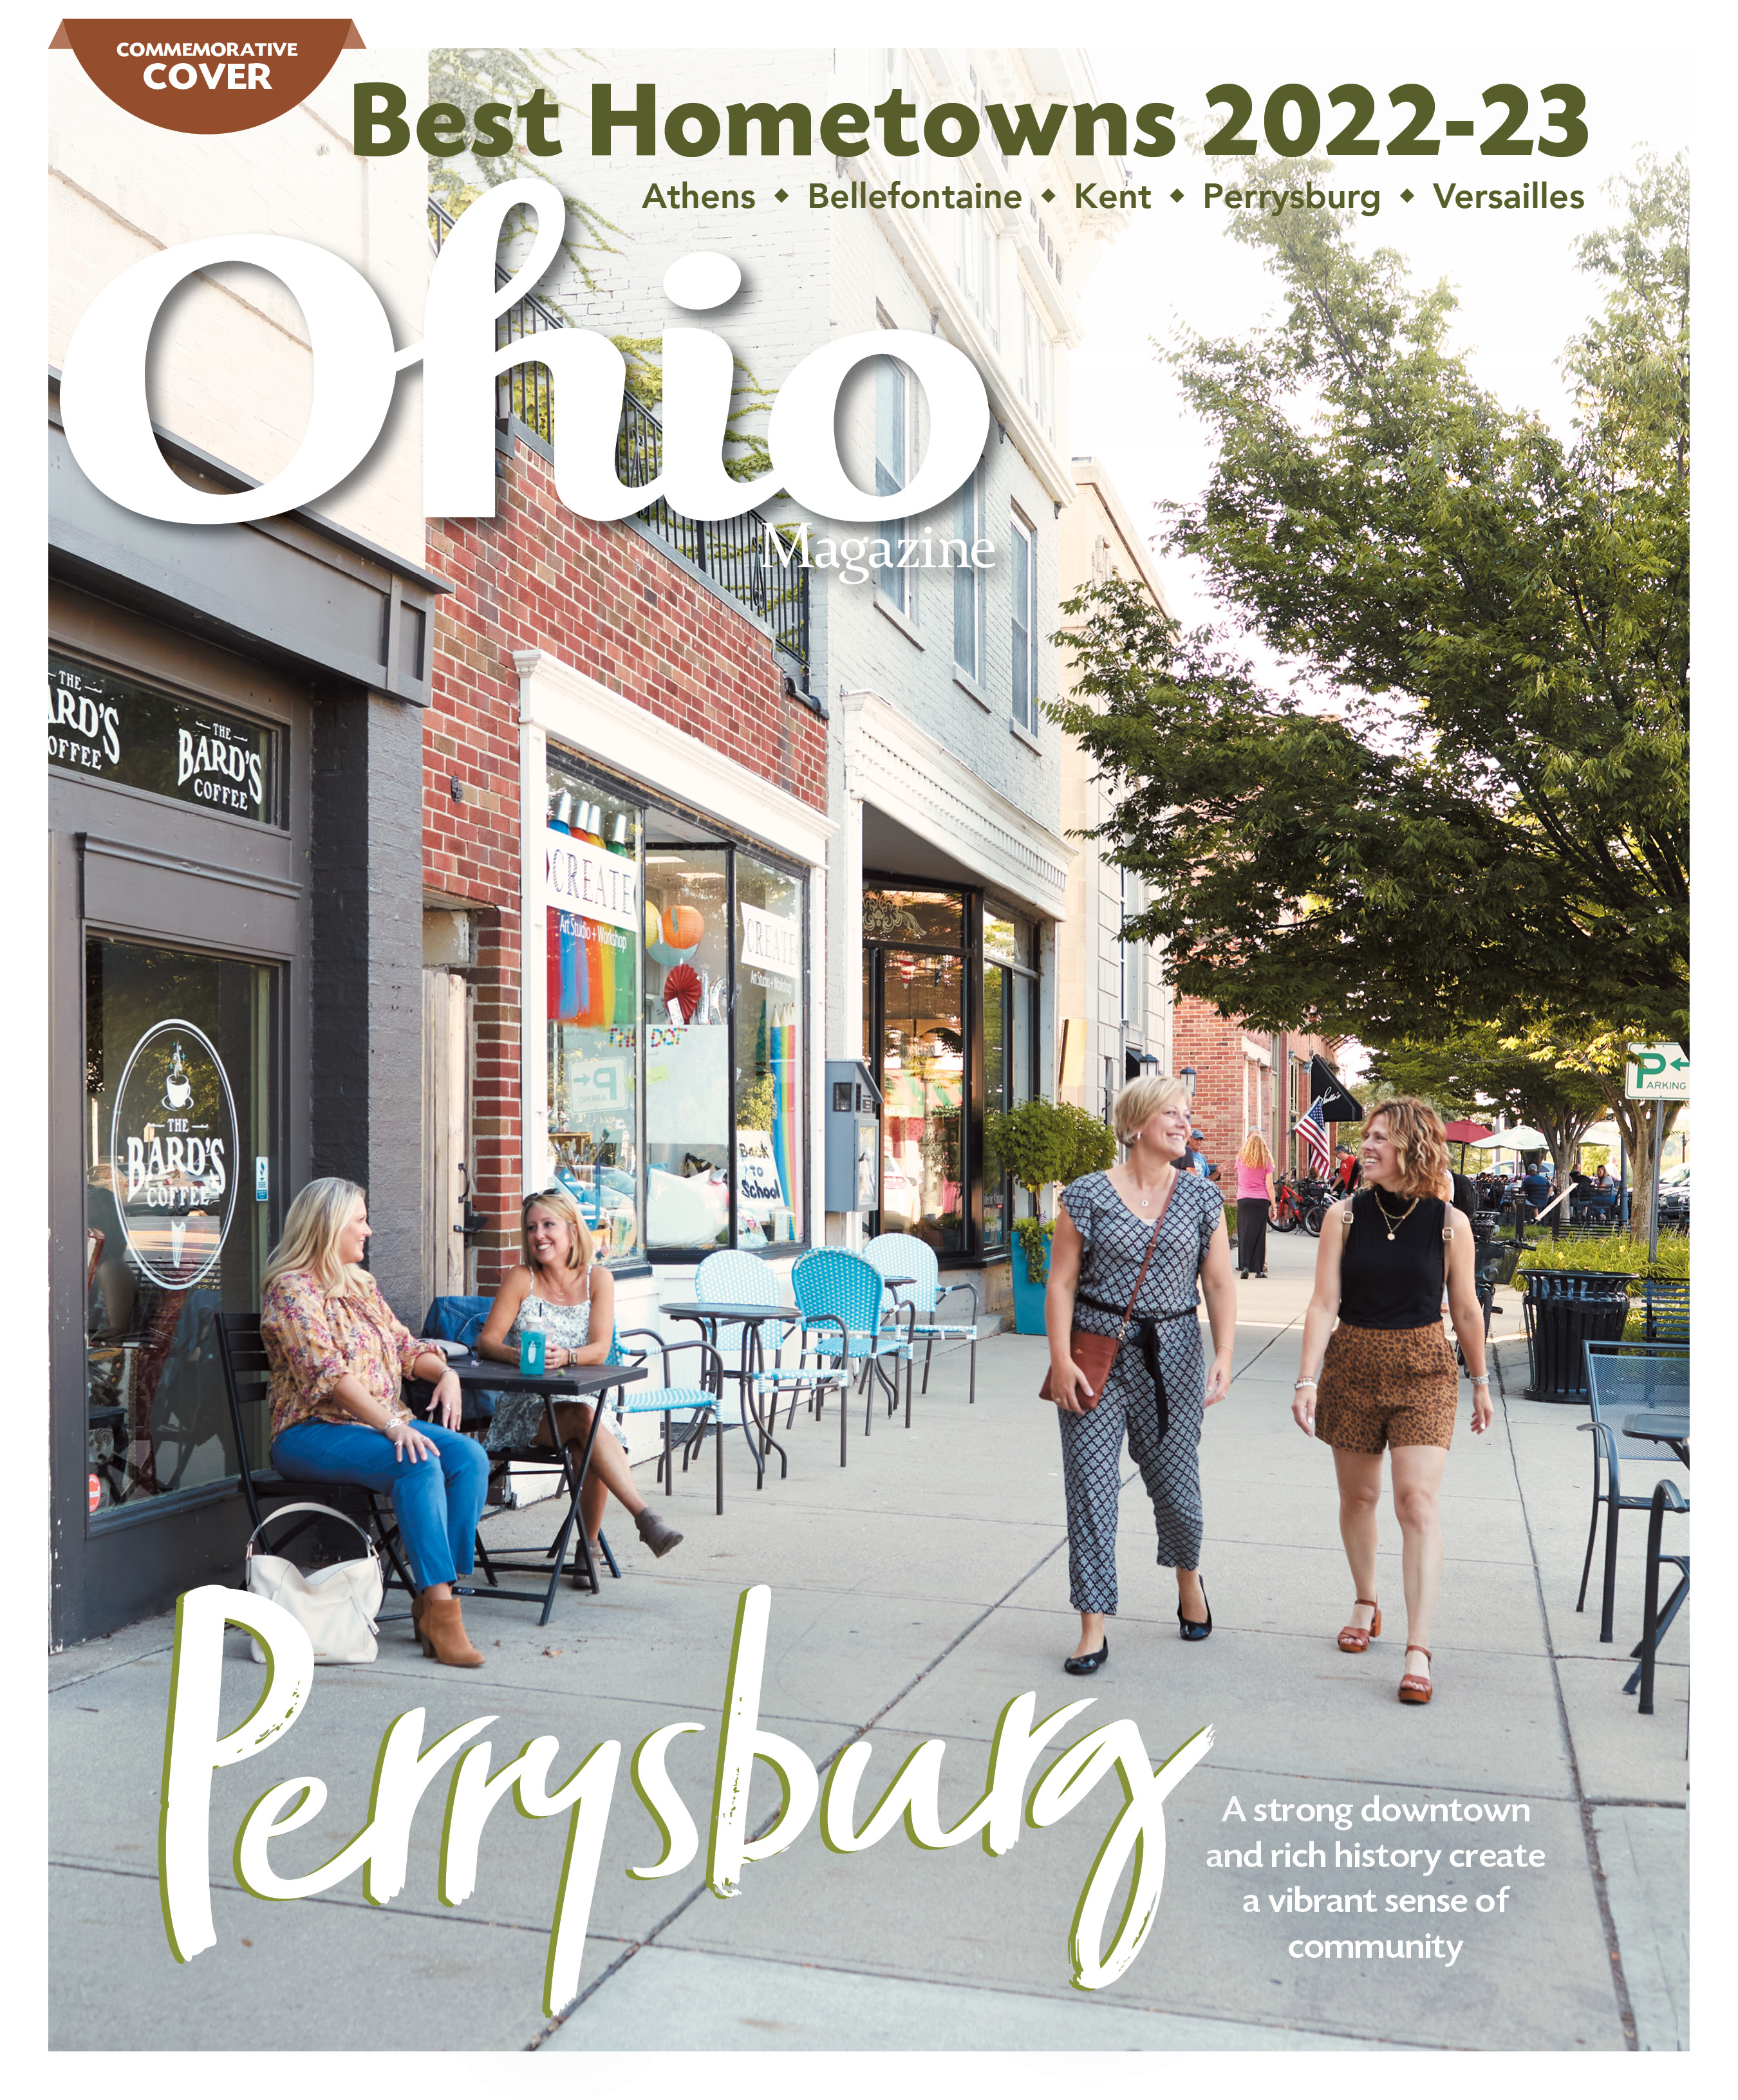 Perrysburg 2022-23 Best Hometowns Cover (photo by Casey Rearick)